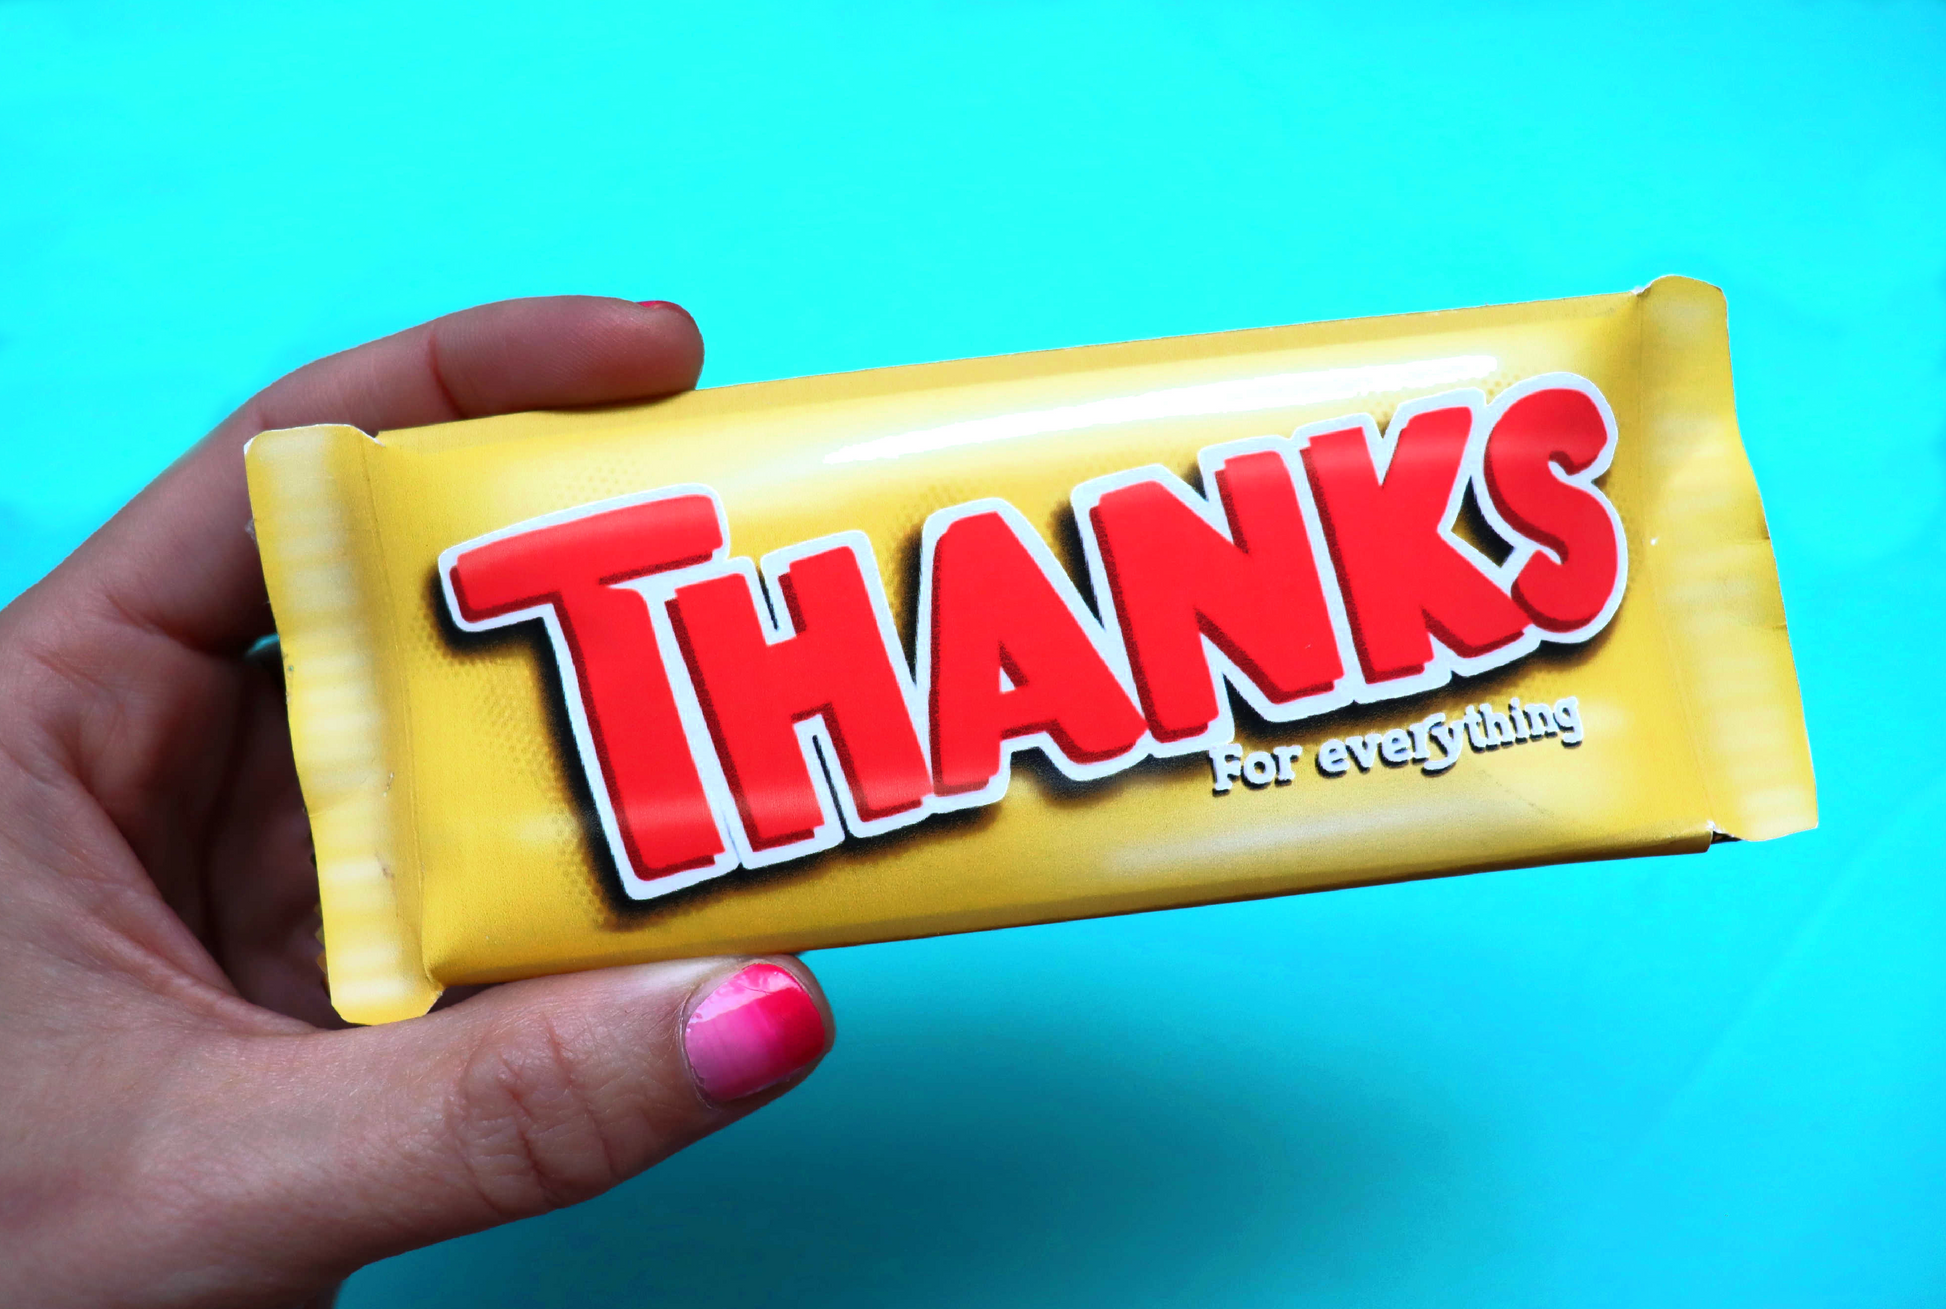 Candy Bar Thank you wrapper printable